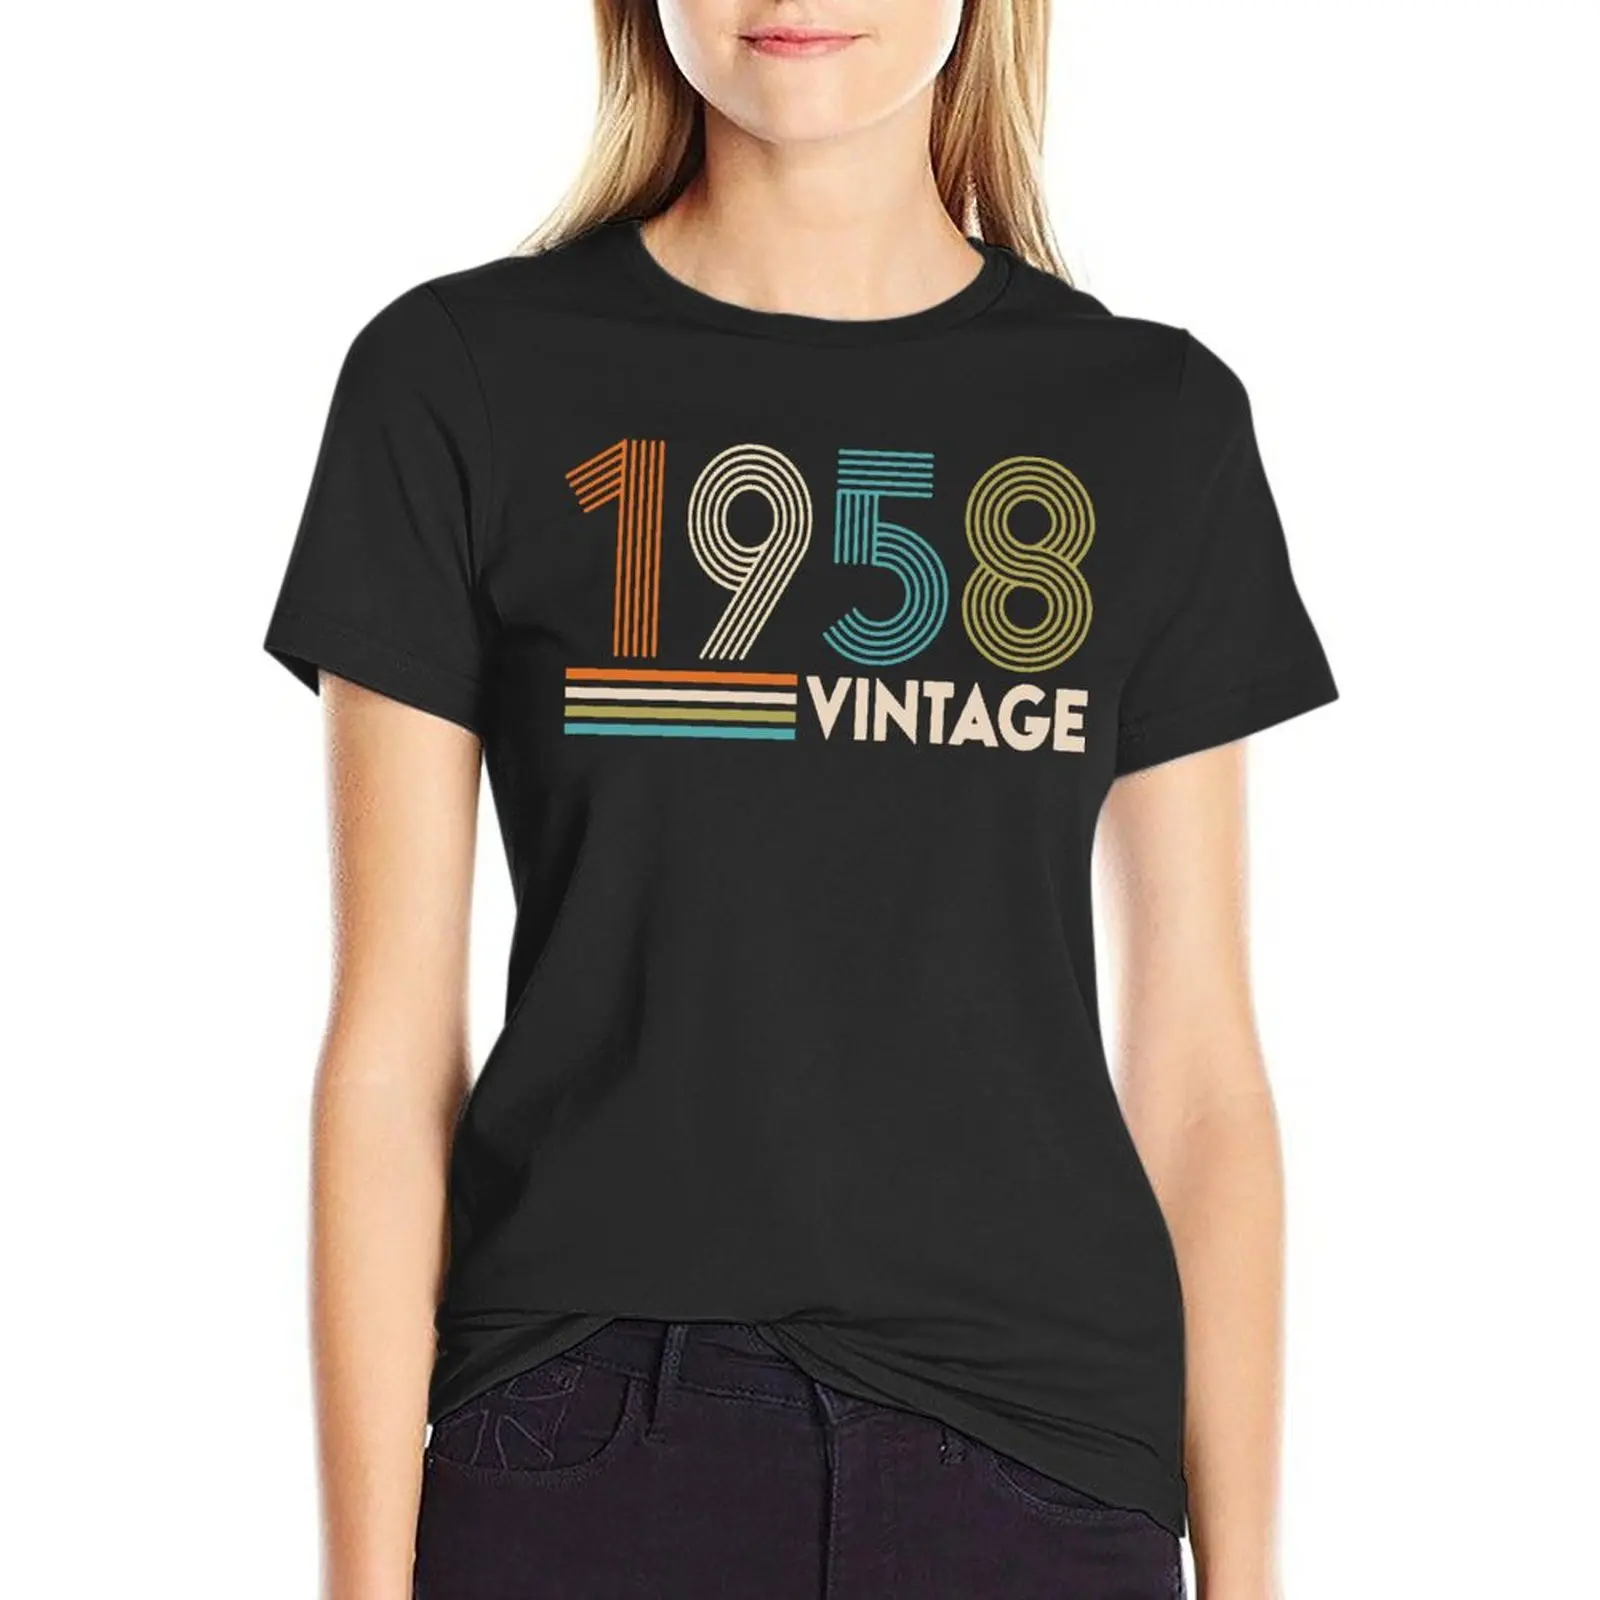 Vintage 1958 Gift Father'S Day Oversize T Shirt For Women'S Clothing 100% Cotton Streetwear Large Size Tops Tee